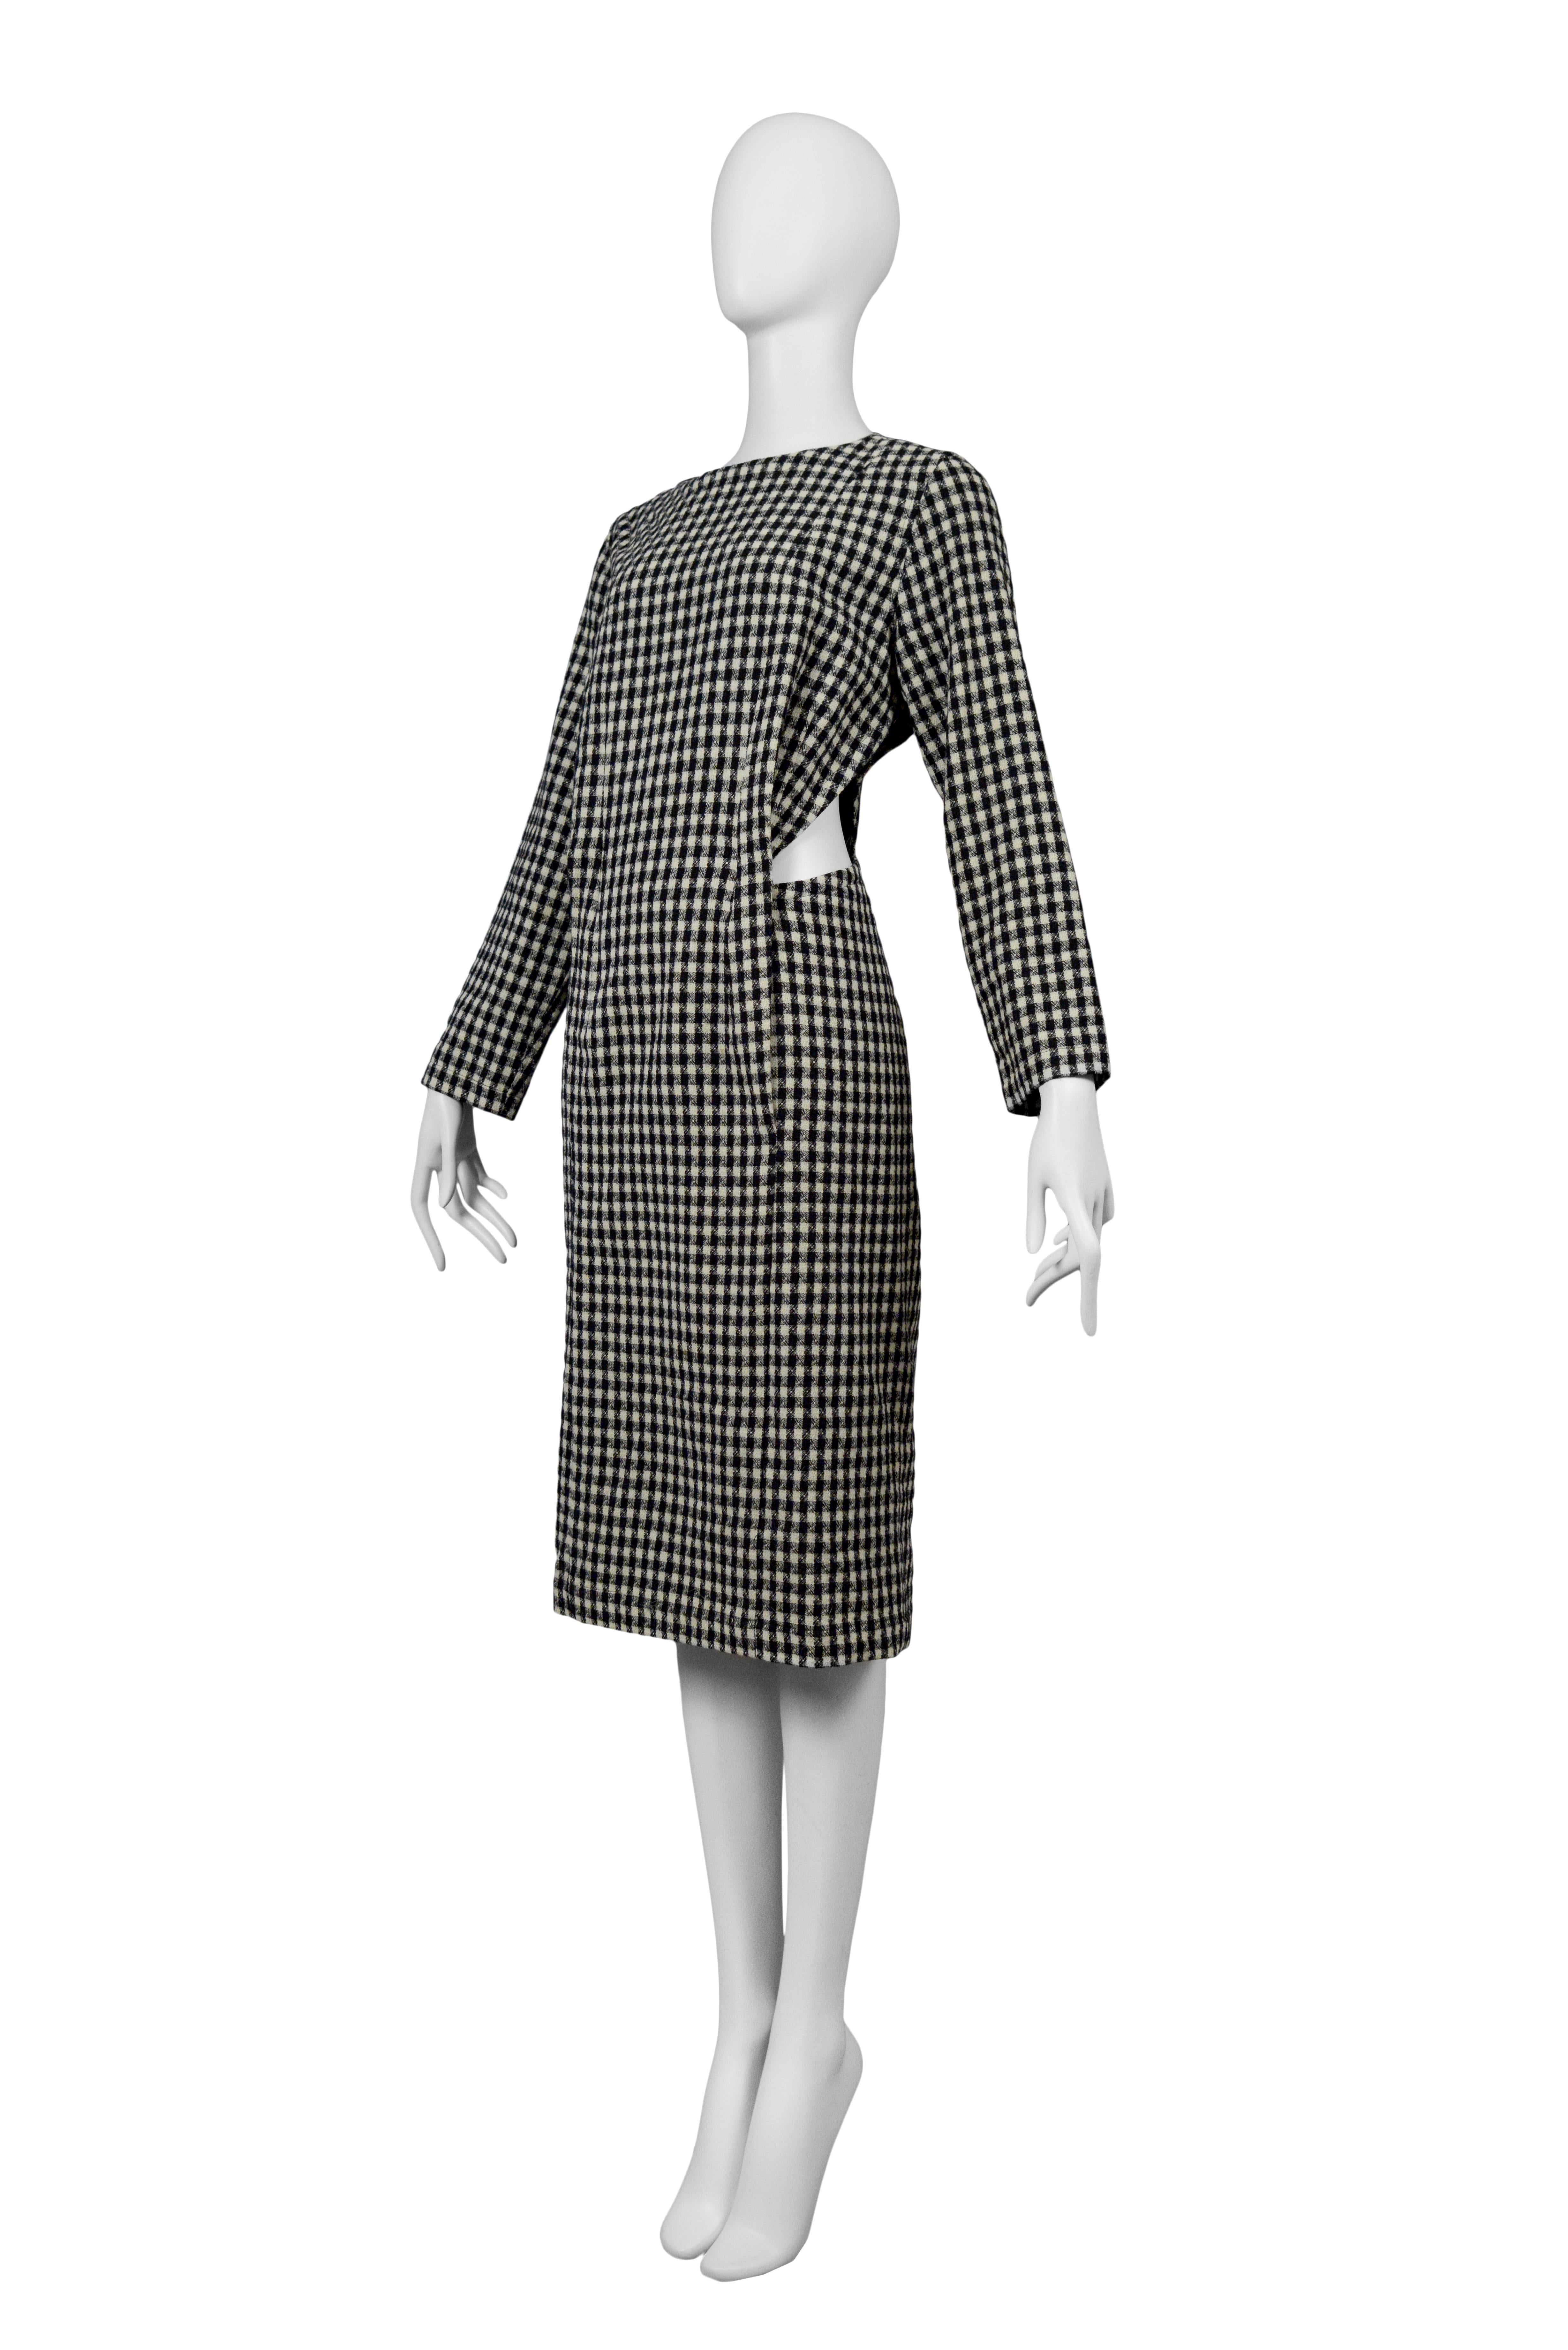 Vintage Comme des Garcons long sleeve houndstooth print dress featuring cut outs at either side of the waist. Circa 1986.
Please inquire for additional images.